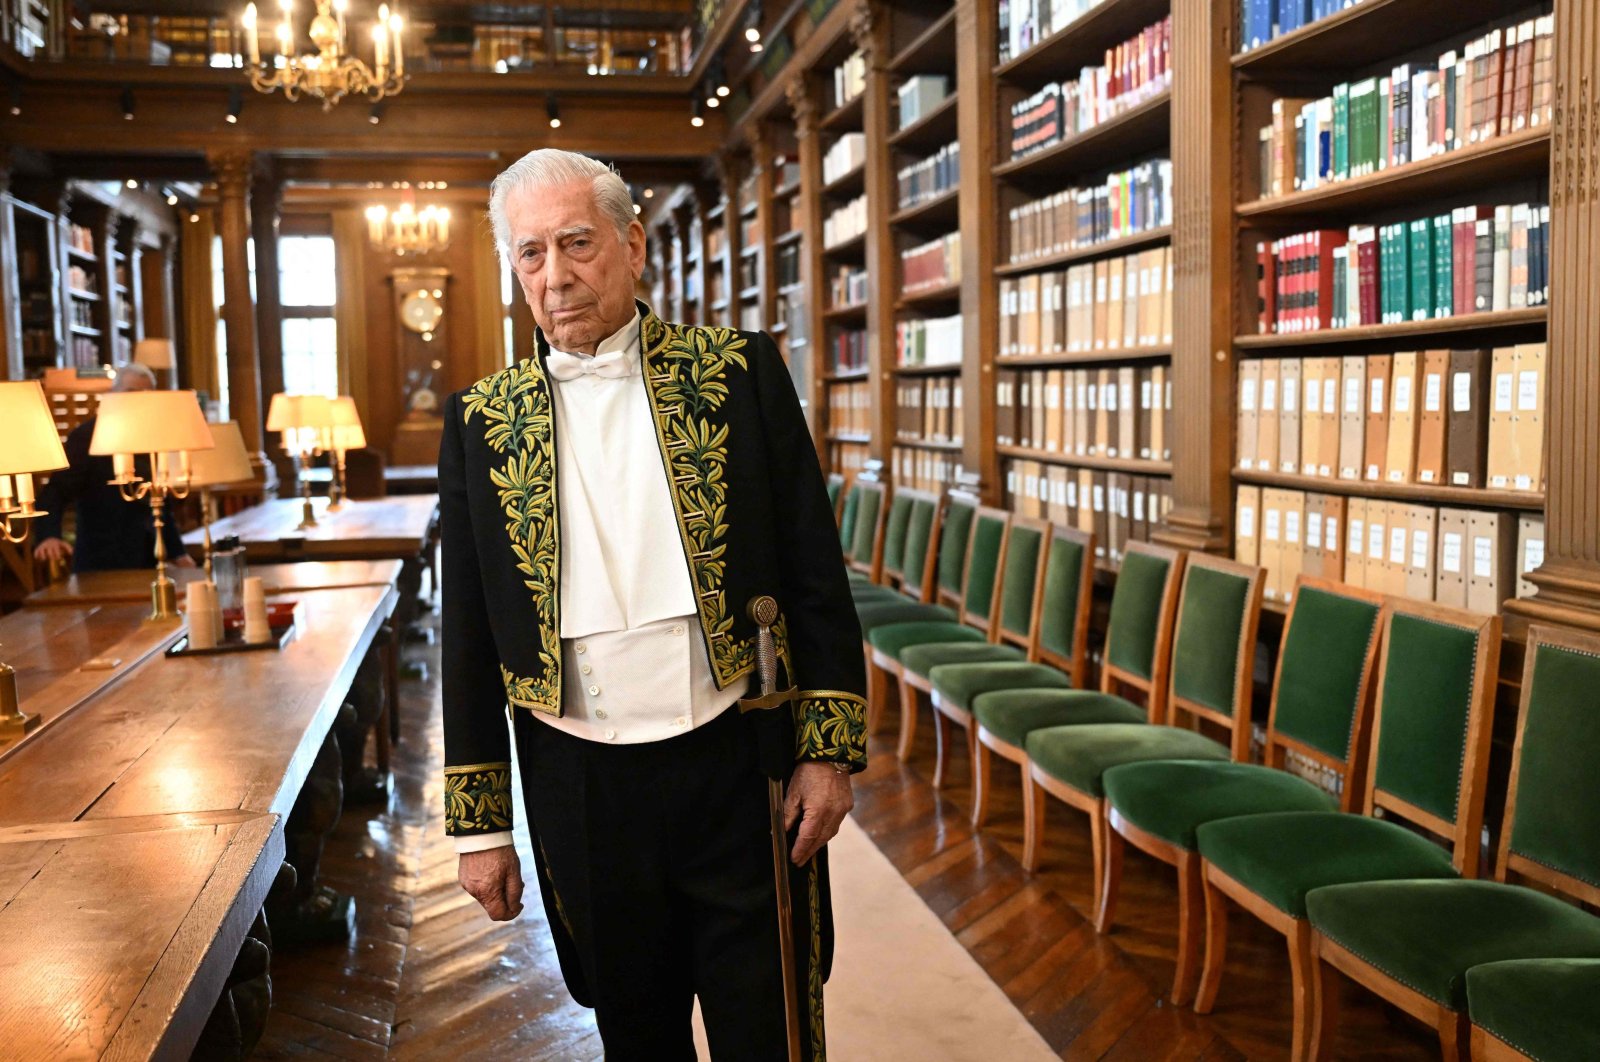 Peruvian writer and Nobel literature prize winner Mario Vargas Llosa poses for a photograph during a ceremony of his induction into the Academie Francaise (French Academy), in Paris, France, Feb. 9, 2023. (AFP Photo)